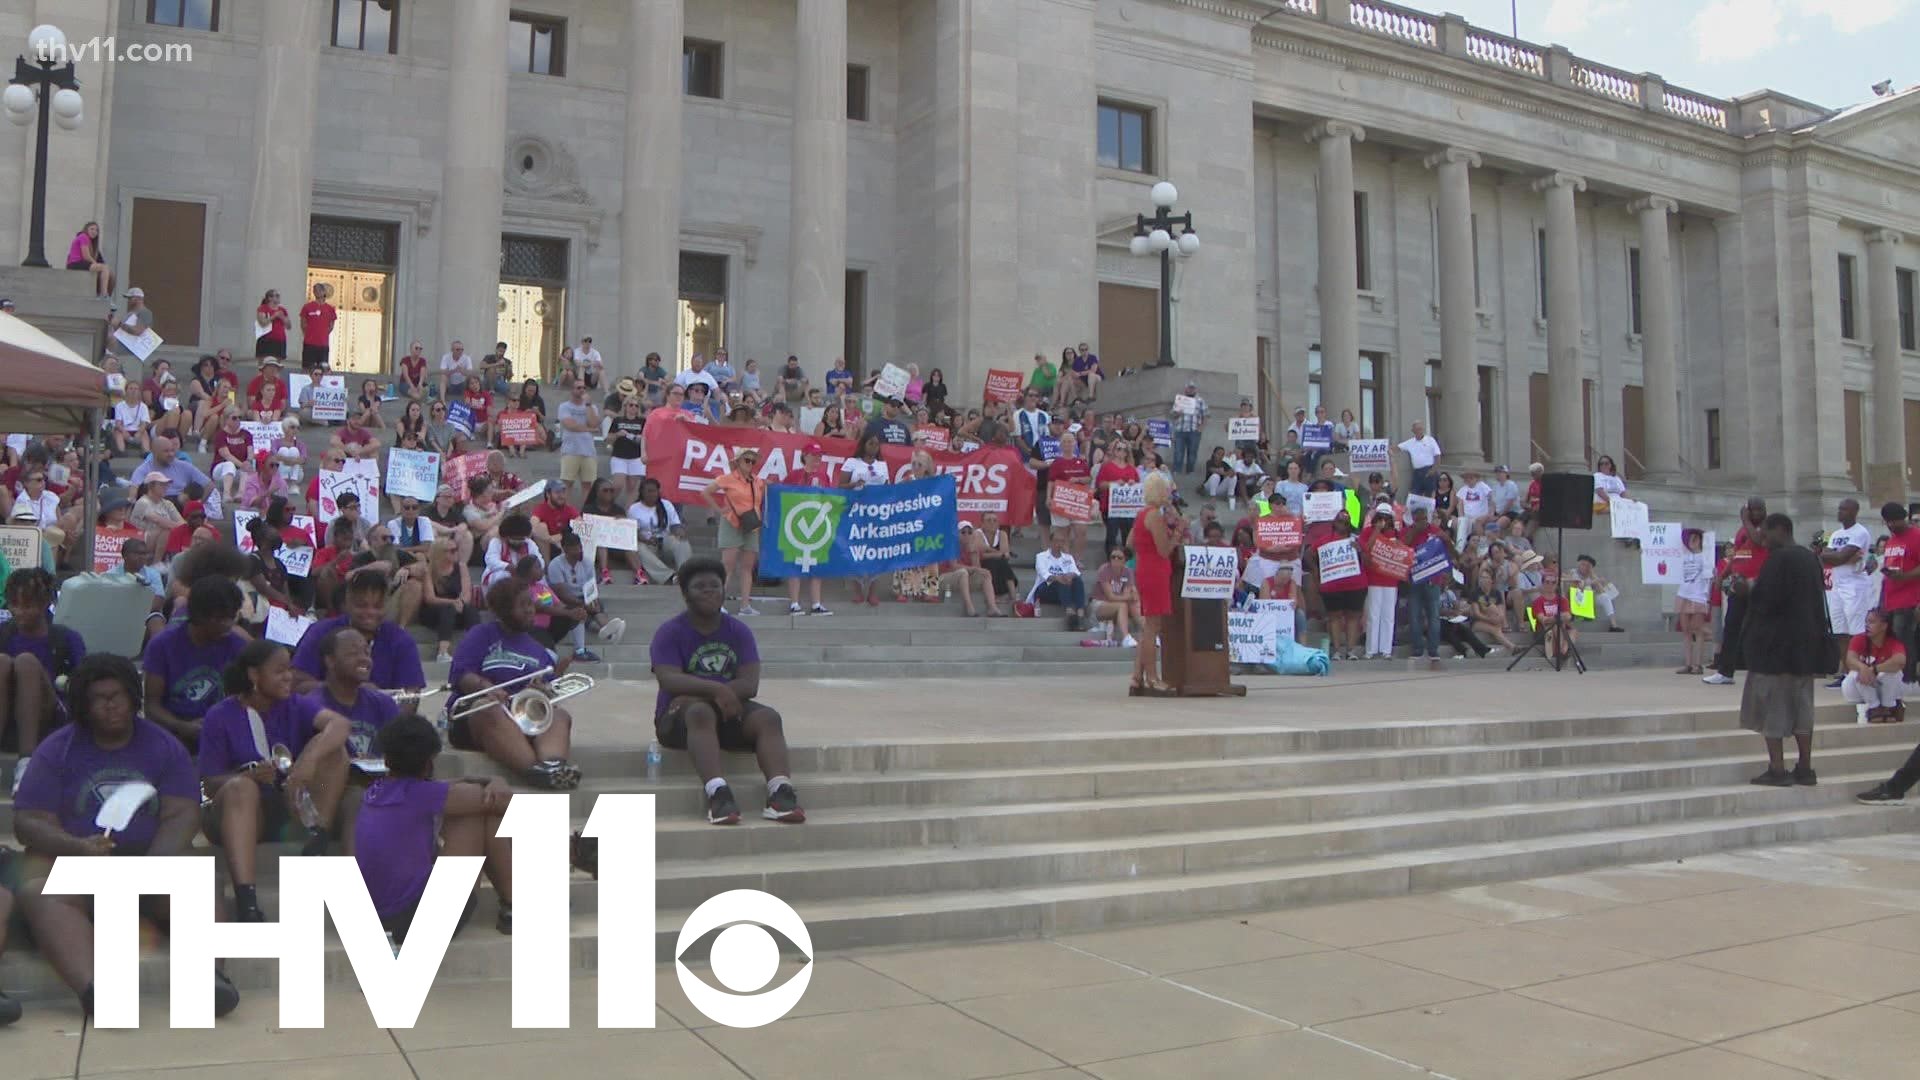 Arkansan teachers gathered at the capitol to ask the state for pay raises, and for them to be put on the upcoming special session agenda.